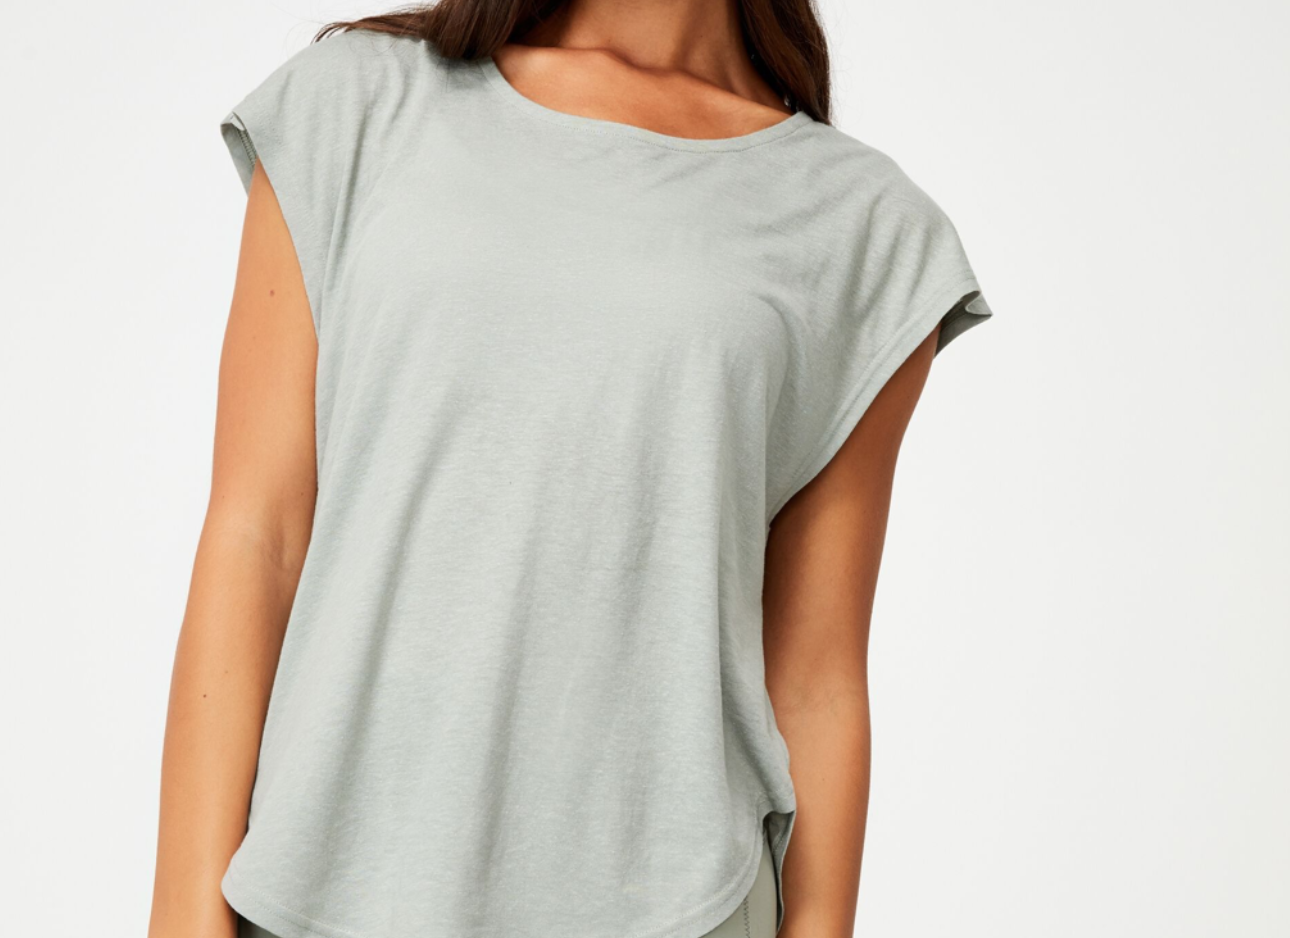 27 Best Yoga Tops to Wear To Class